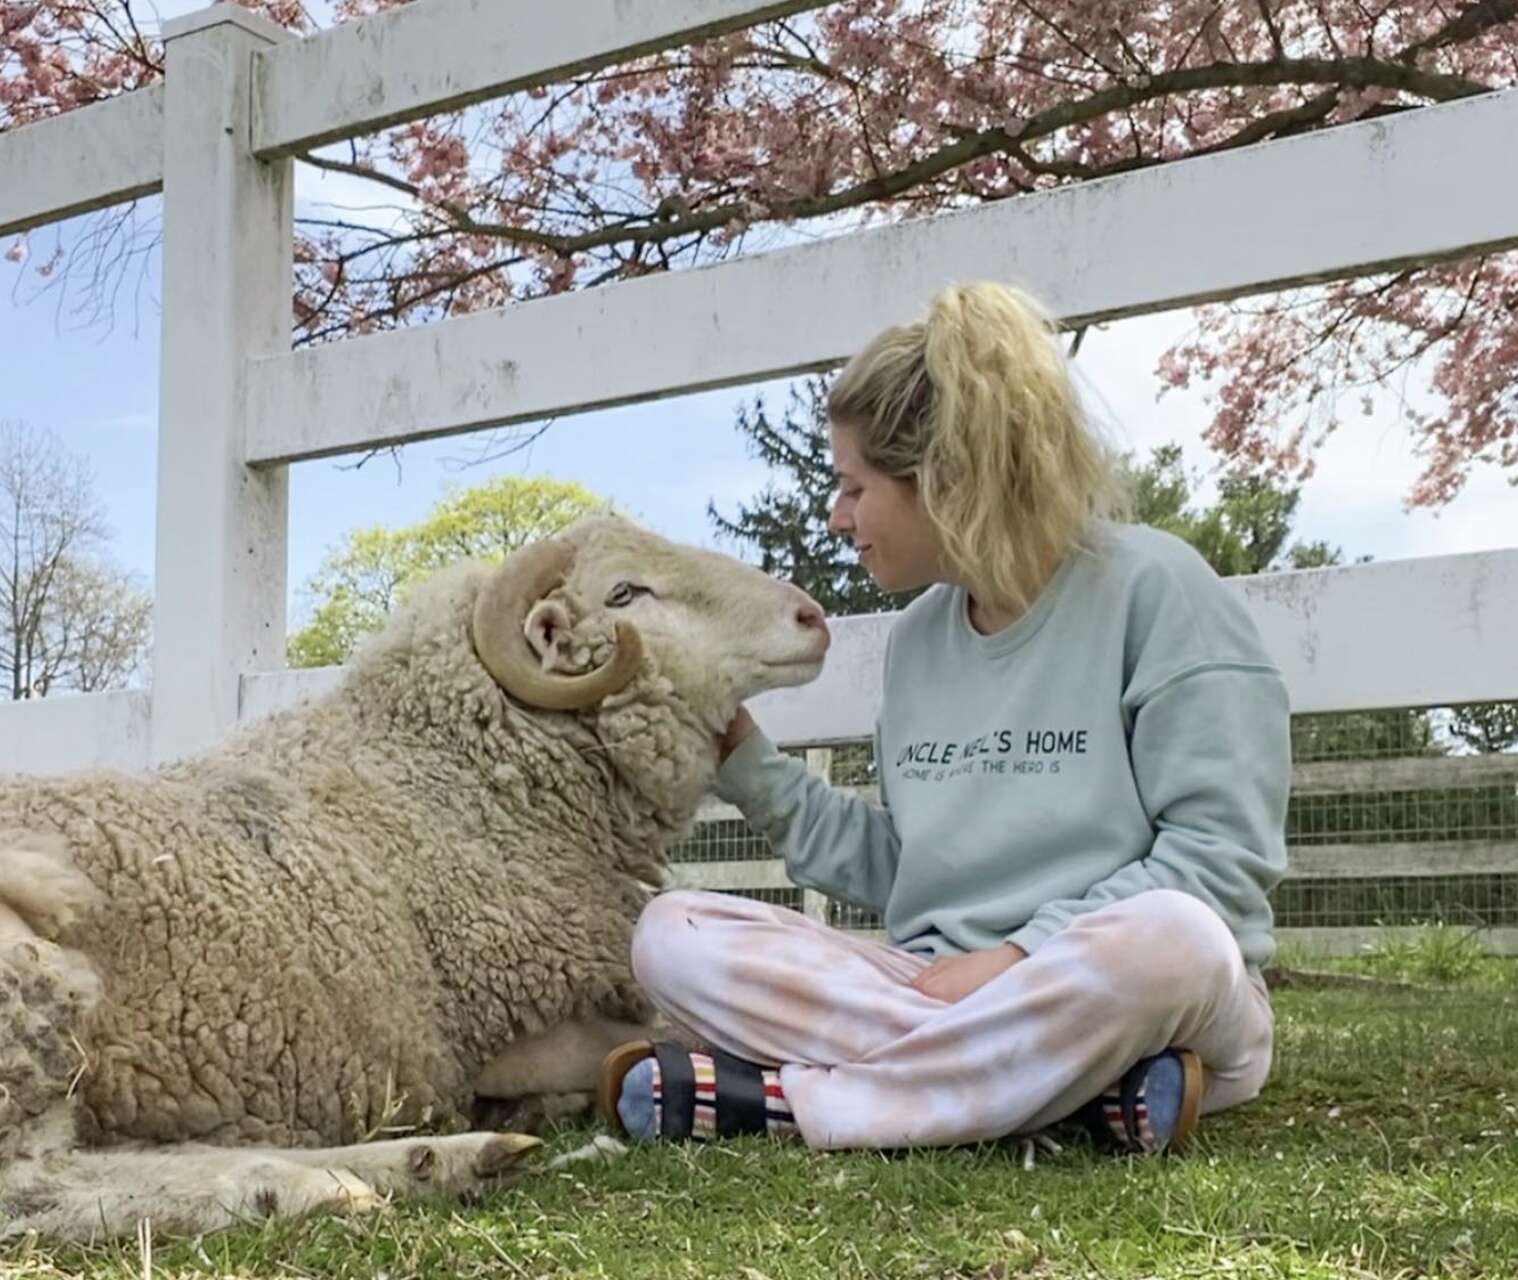 A woman kisses a ram as they sit on the grass together.